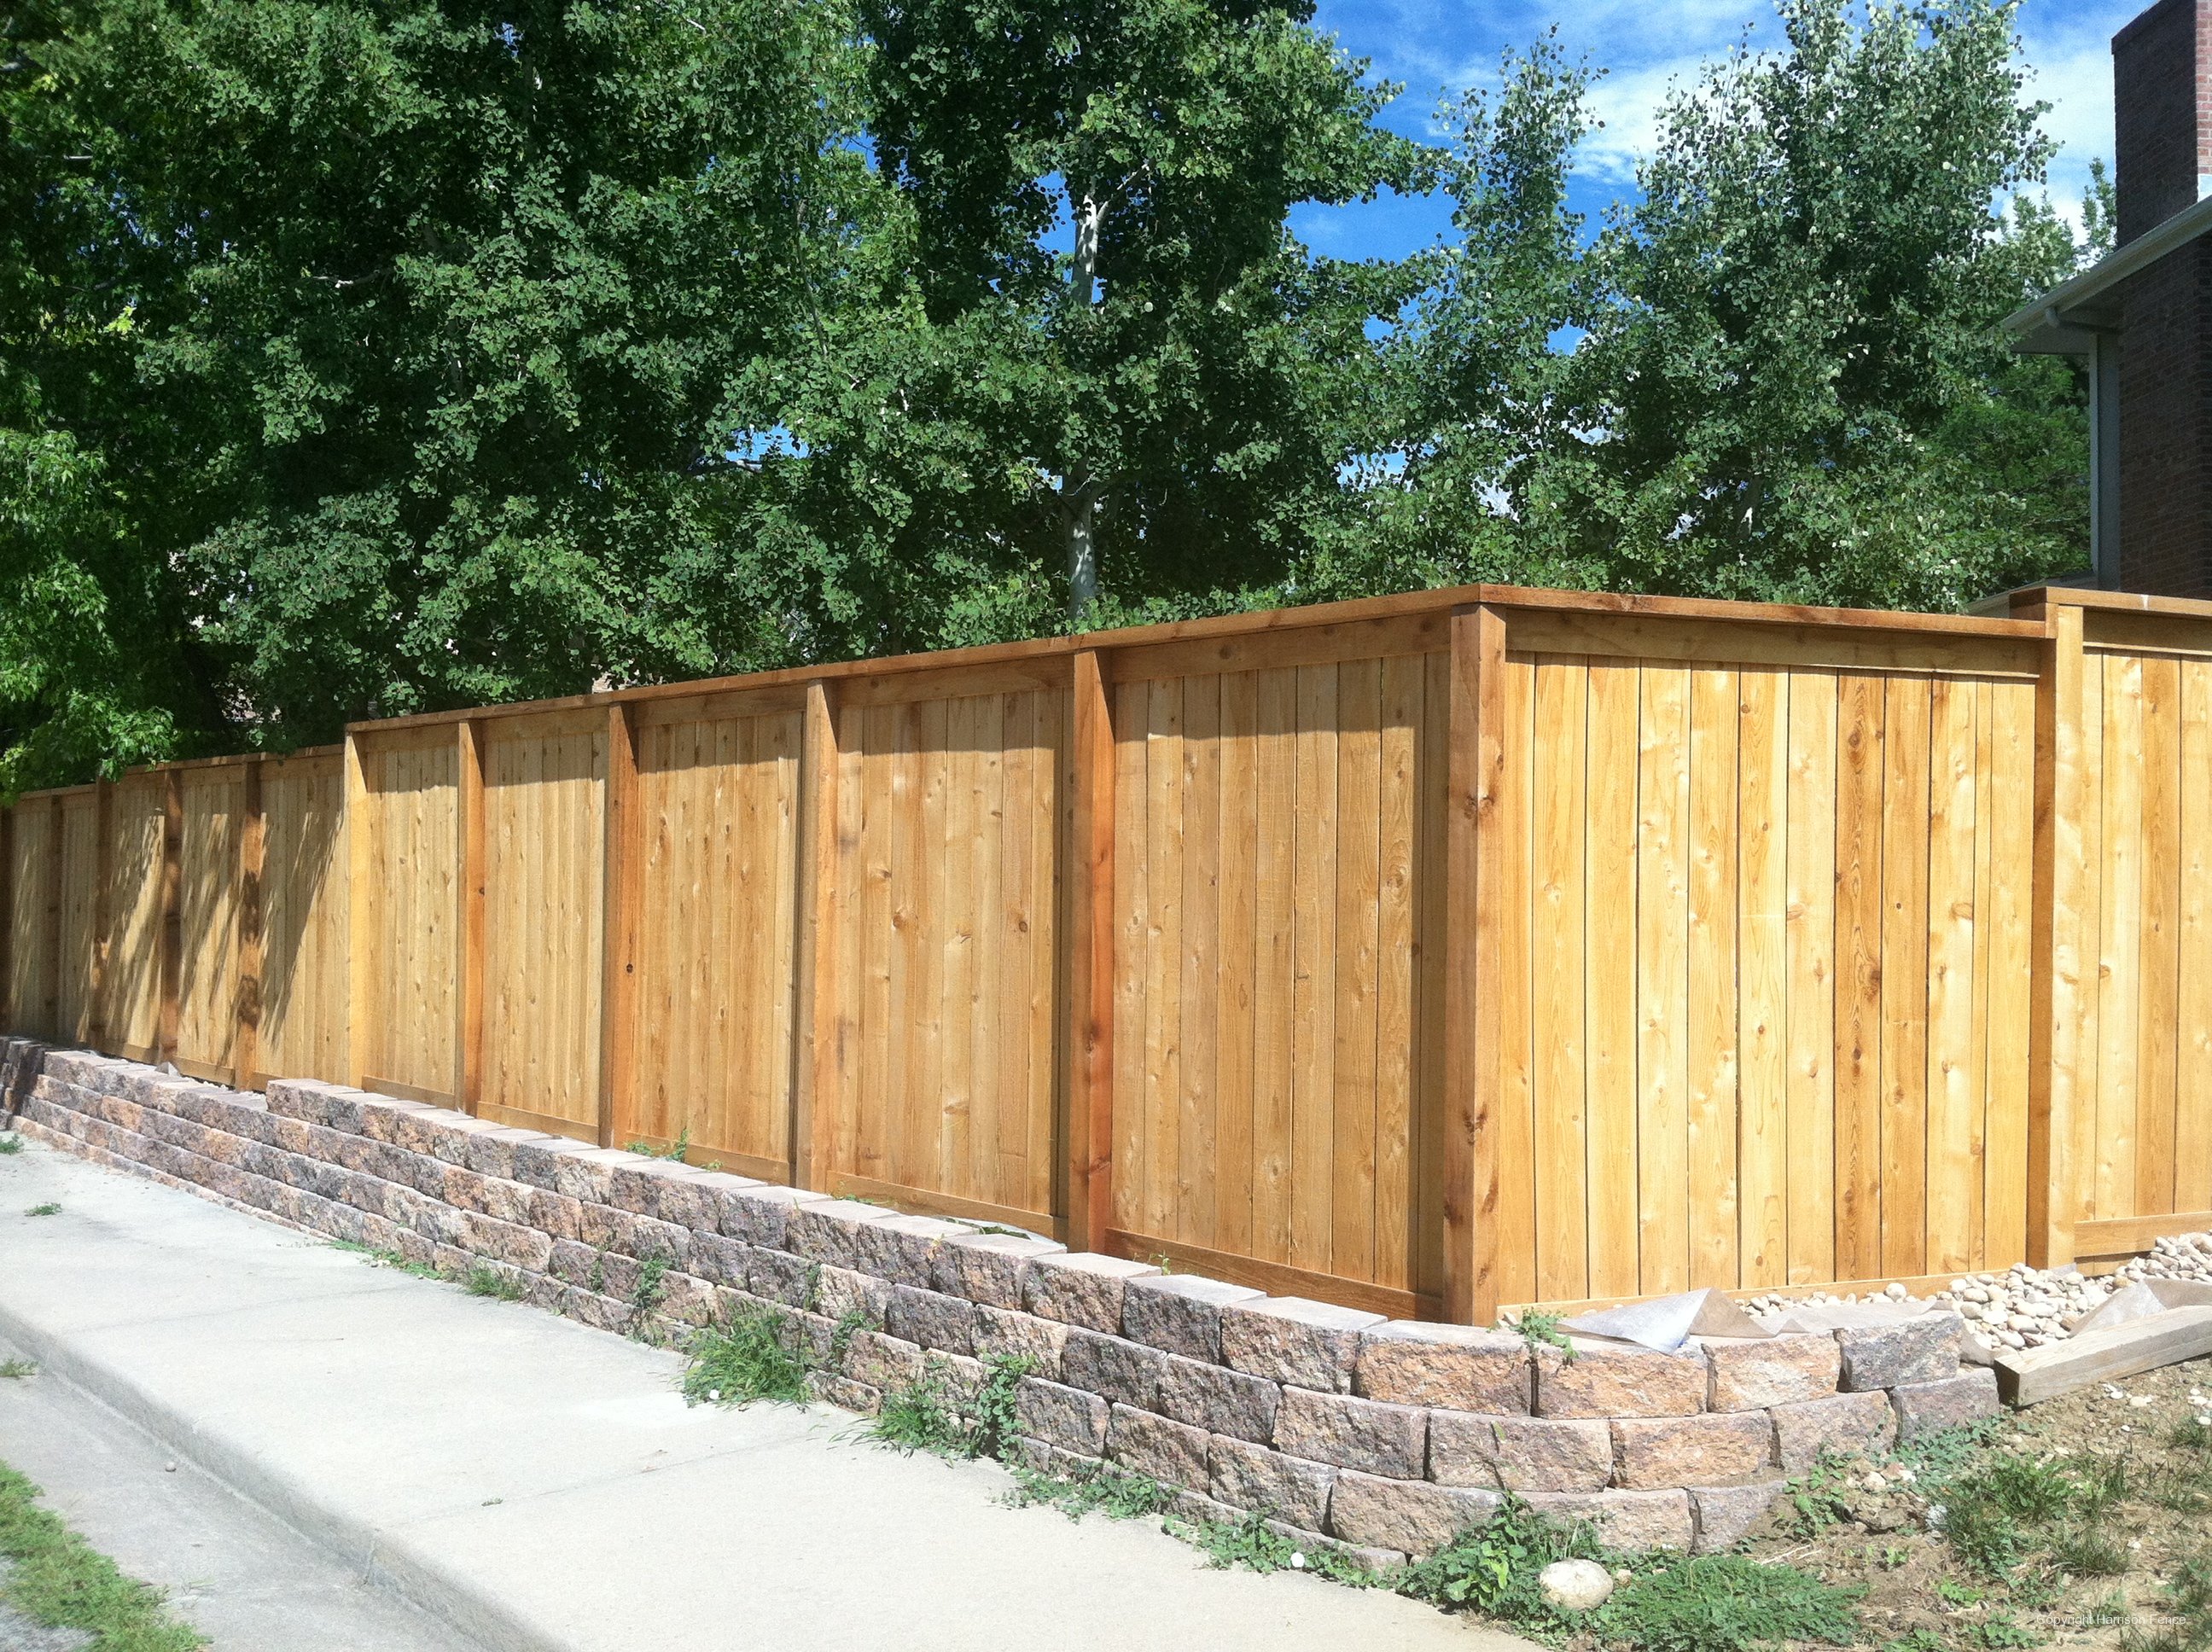 Privacy Fence Panels